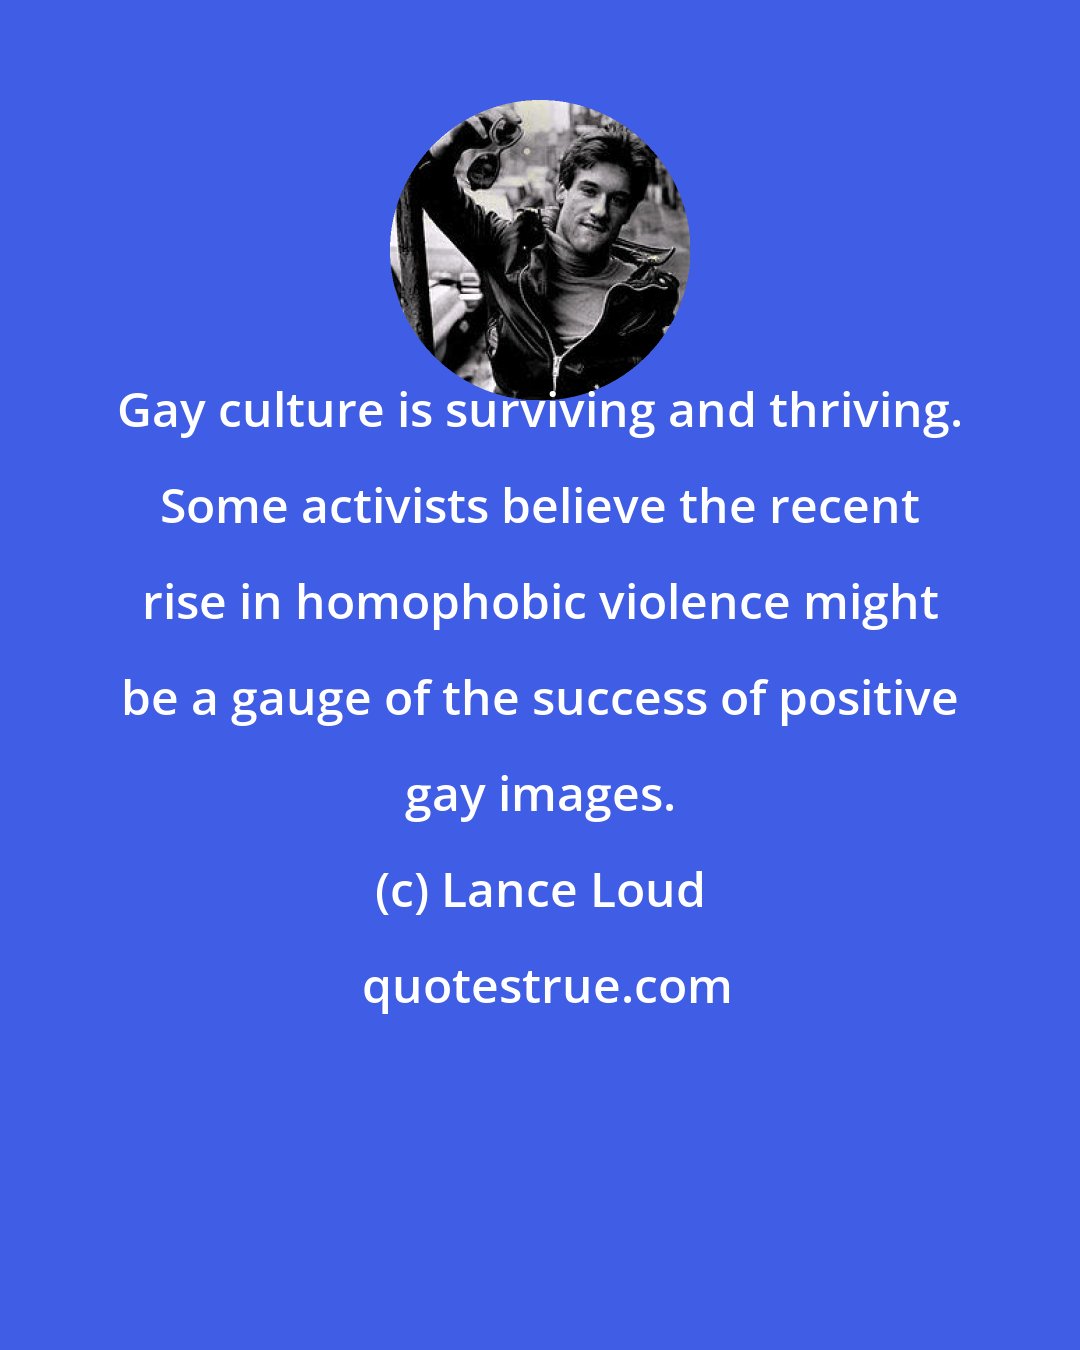 Lance Loud: Gay culture is surviving and thriving. Some activists believe the recent rise in homophobic violence might be a gauge of the success of positive gay images.